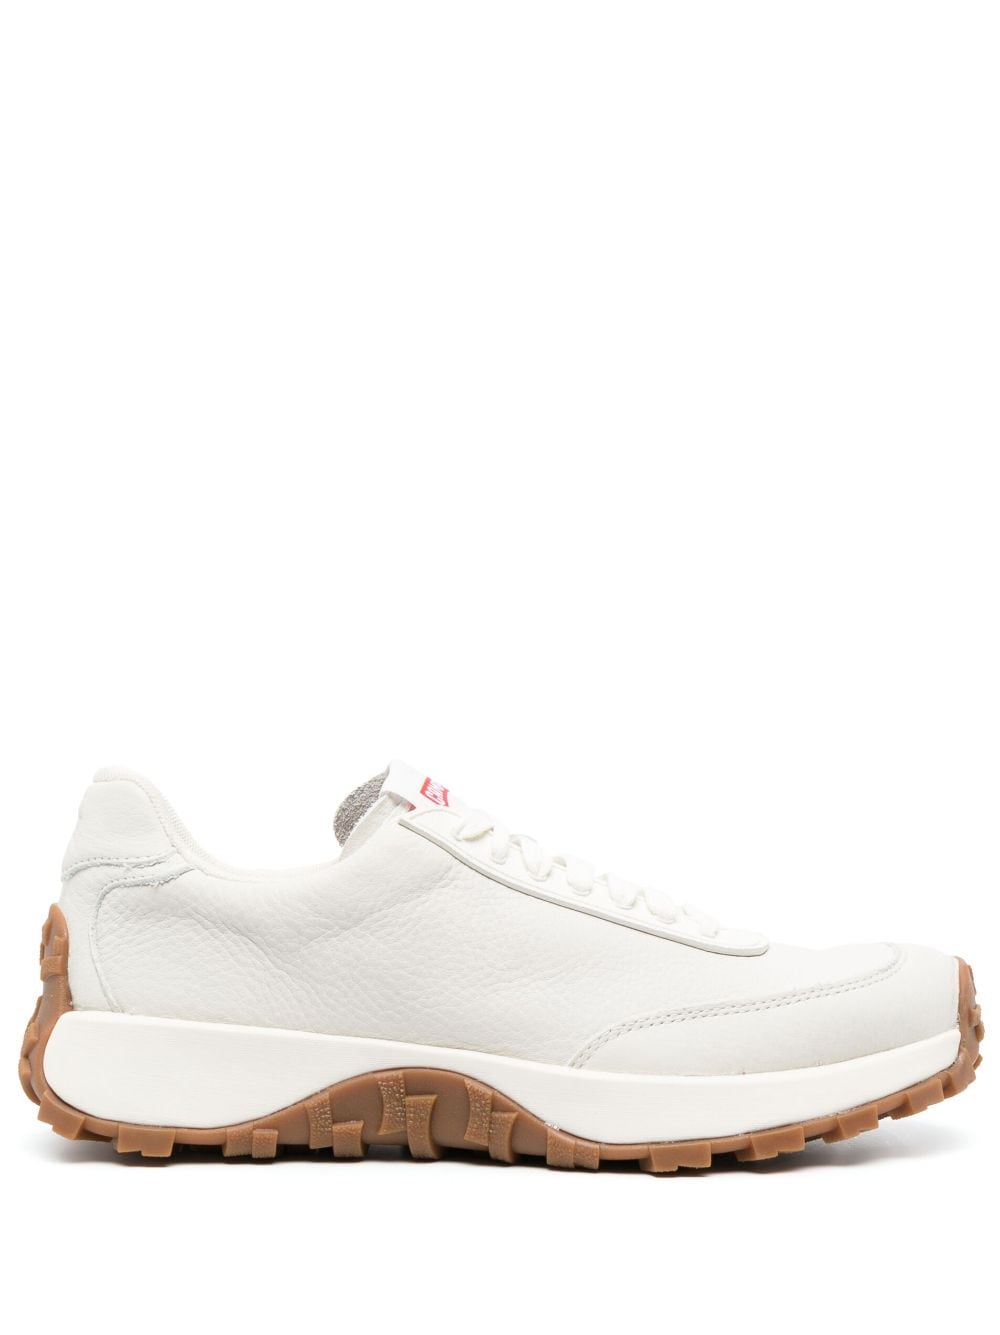 Camper Drift Trail leather low-top sneakers - White von Camper